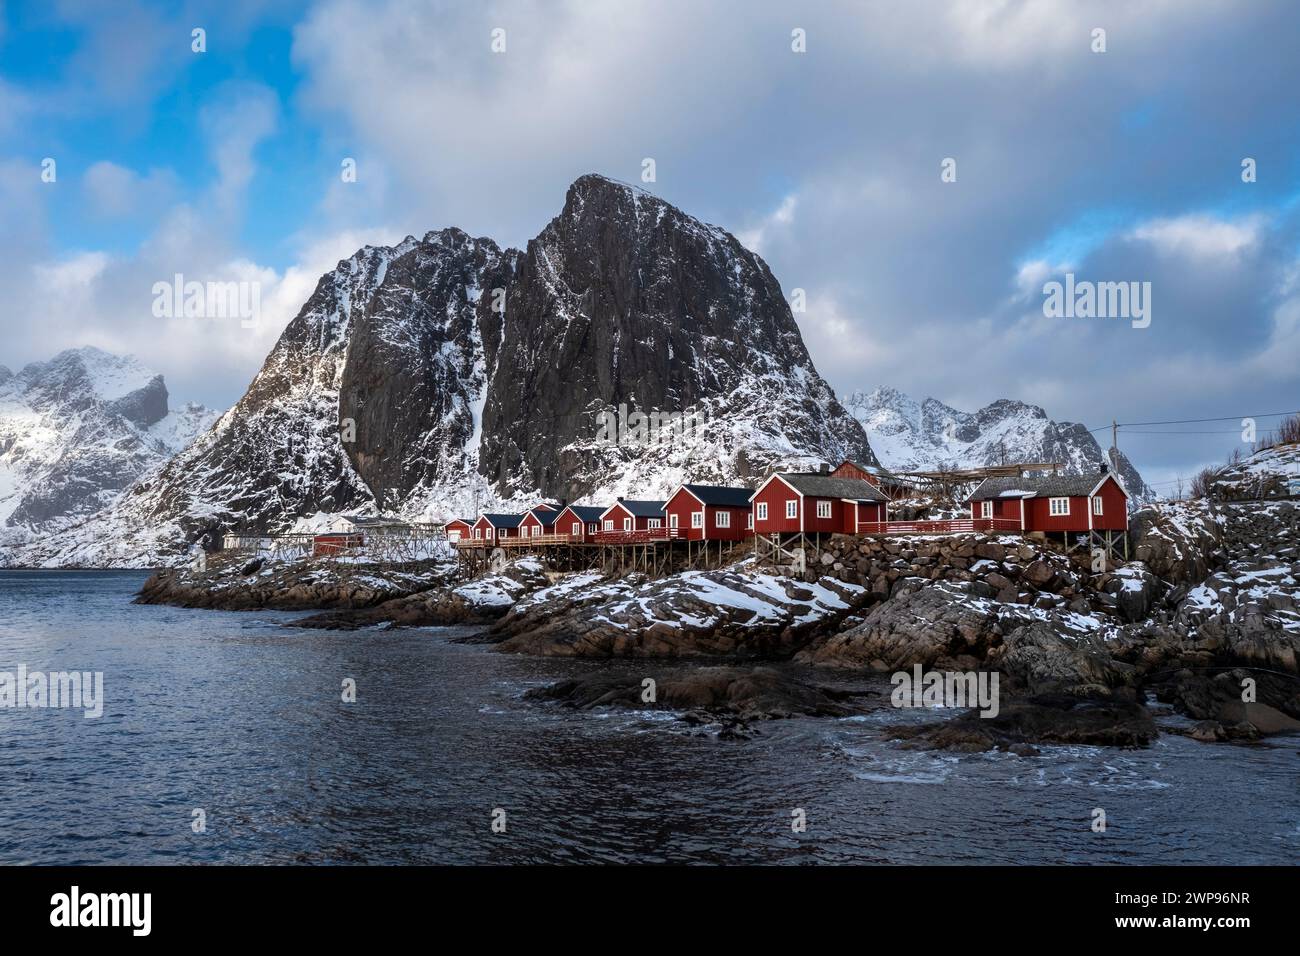 View of the Hamnøya island with the famous red rorbuer and the Lilandstinden mountain in Reine Bay during winter. Lofoten Islands, Norway. Stock Photo